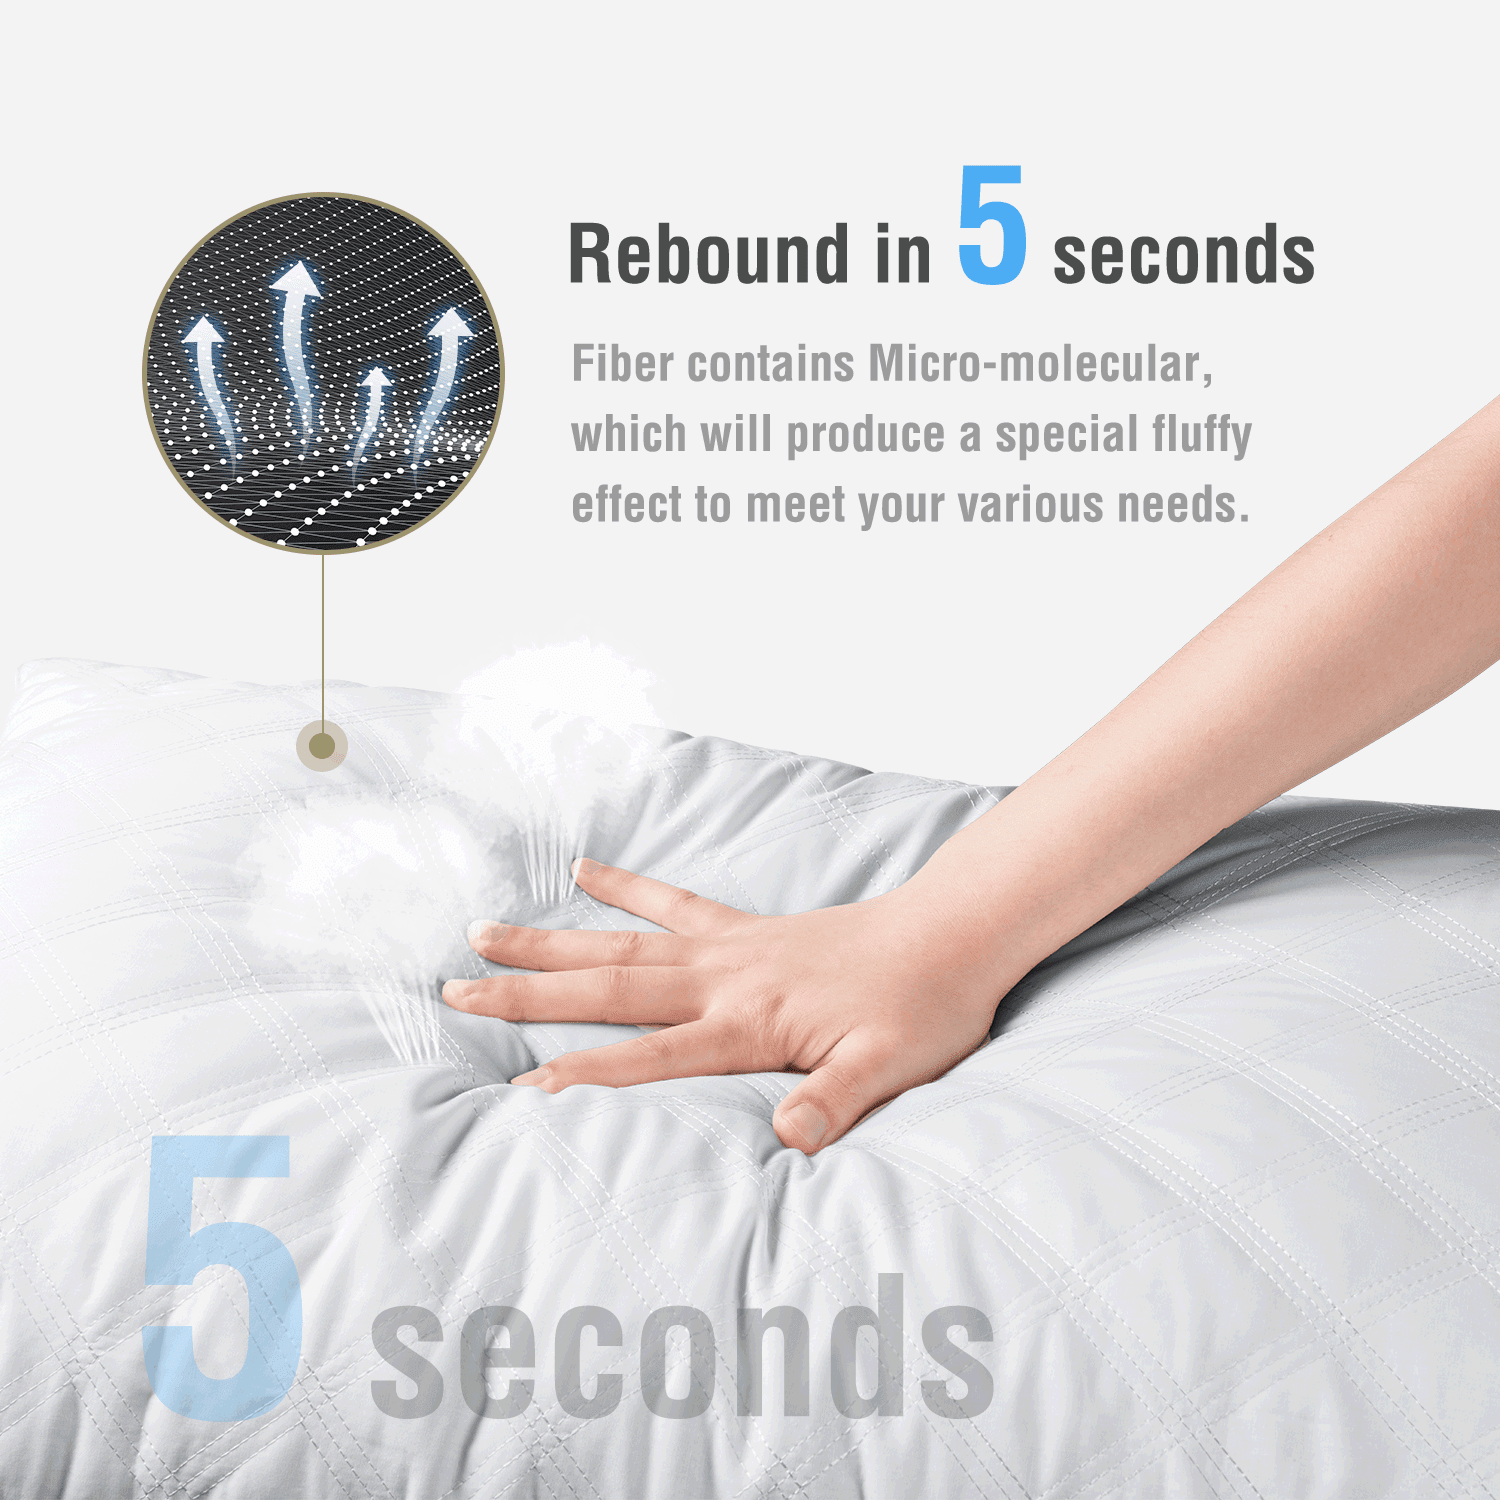 Bed Pillows for Sleeping Standard Size 20 inch x 26 inch Hypoallergenic Pillow for Side and Back Sleeper Luxury Soft Supportive Hotel Collection